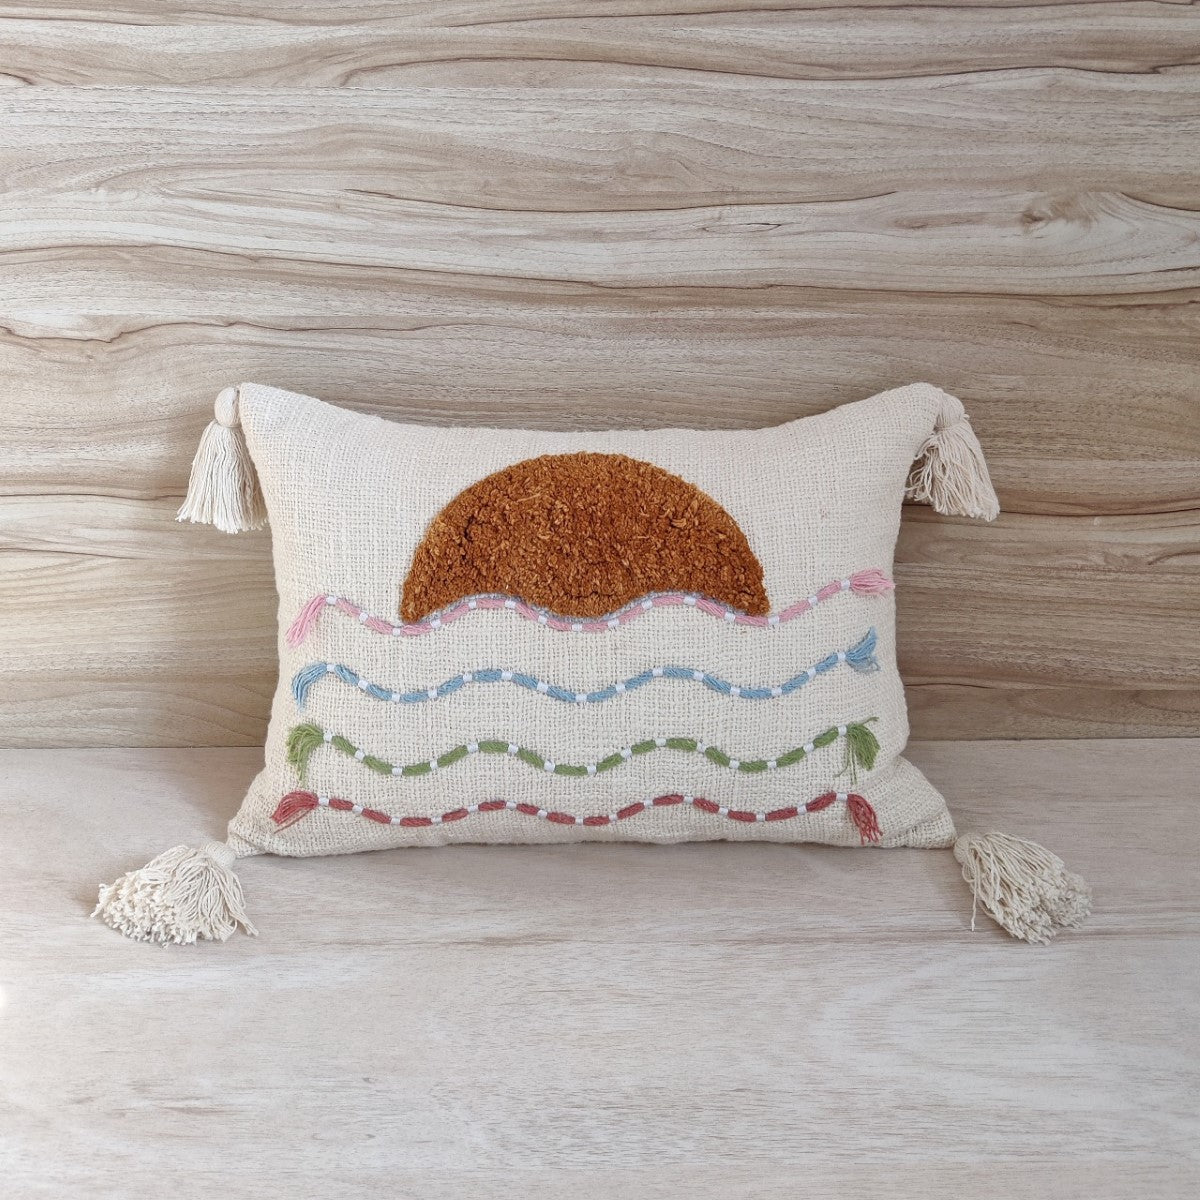 Sunset On The Beach Tufted Cotton Cushion Cover